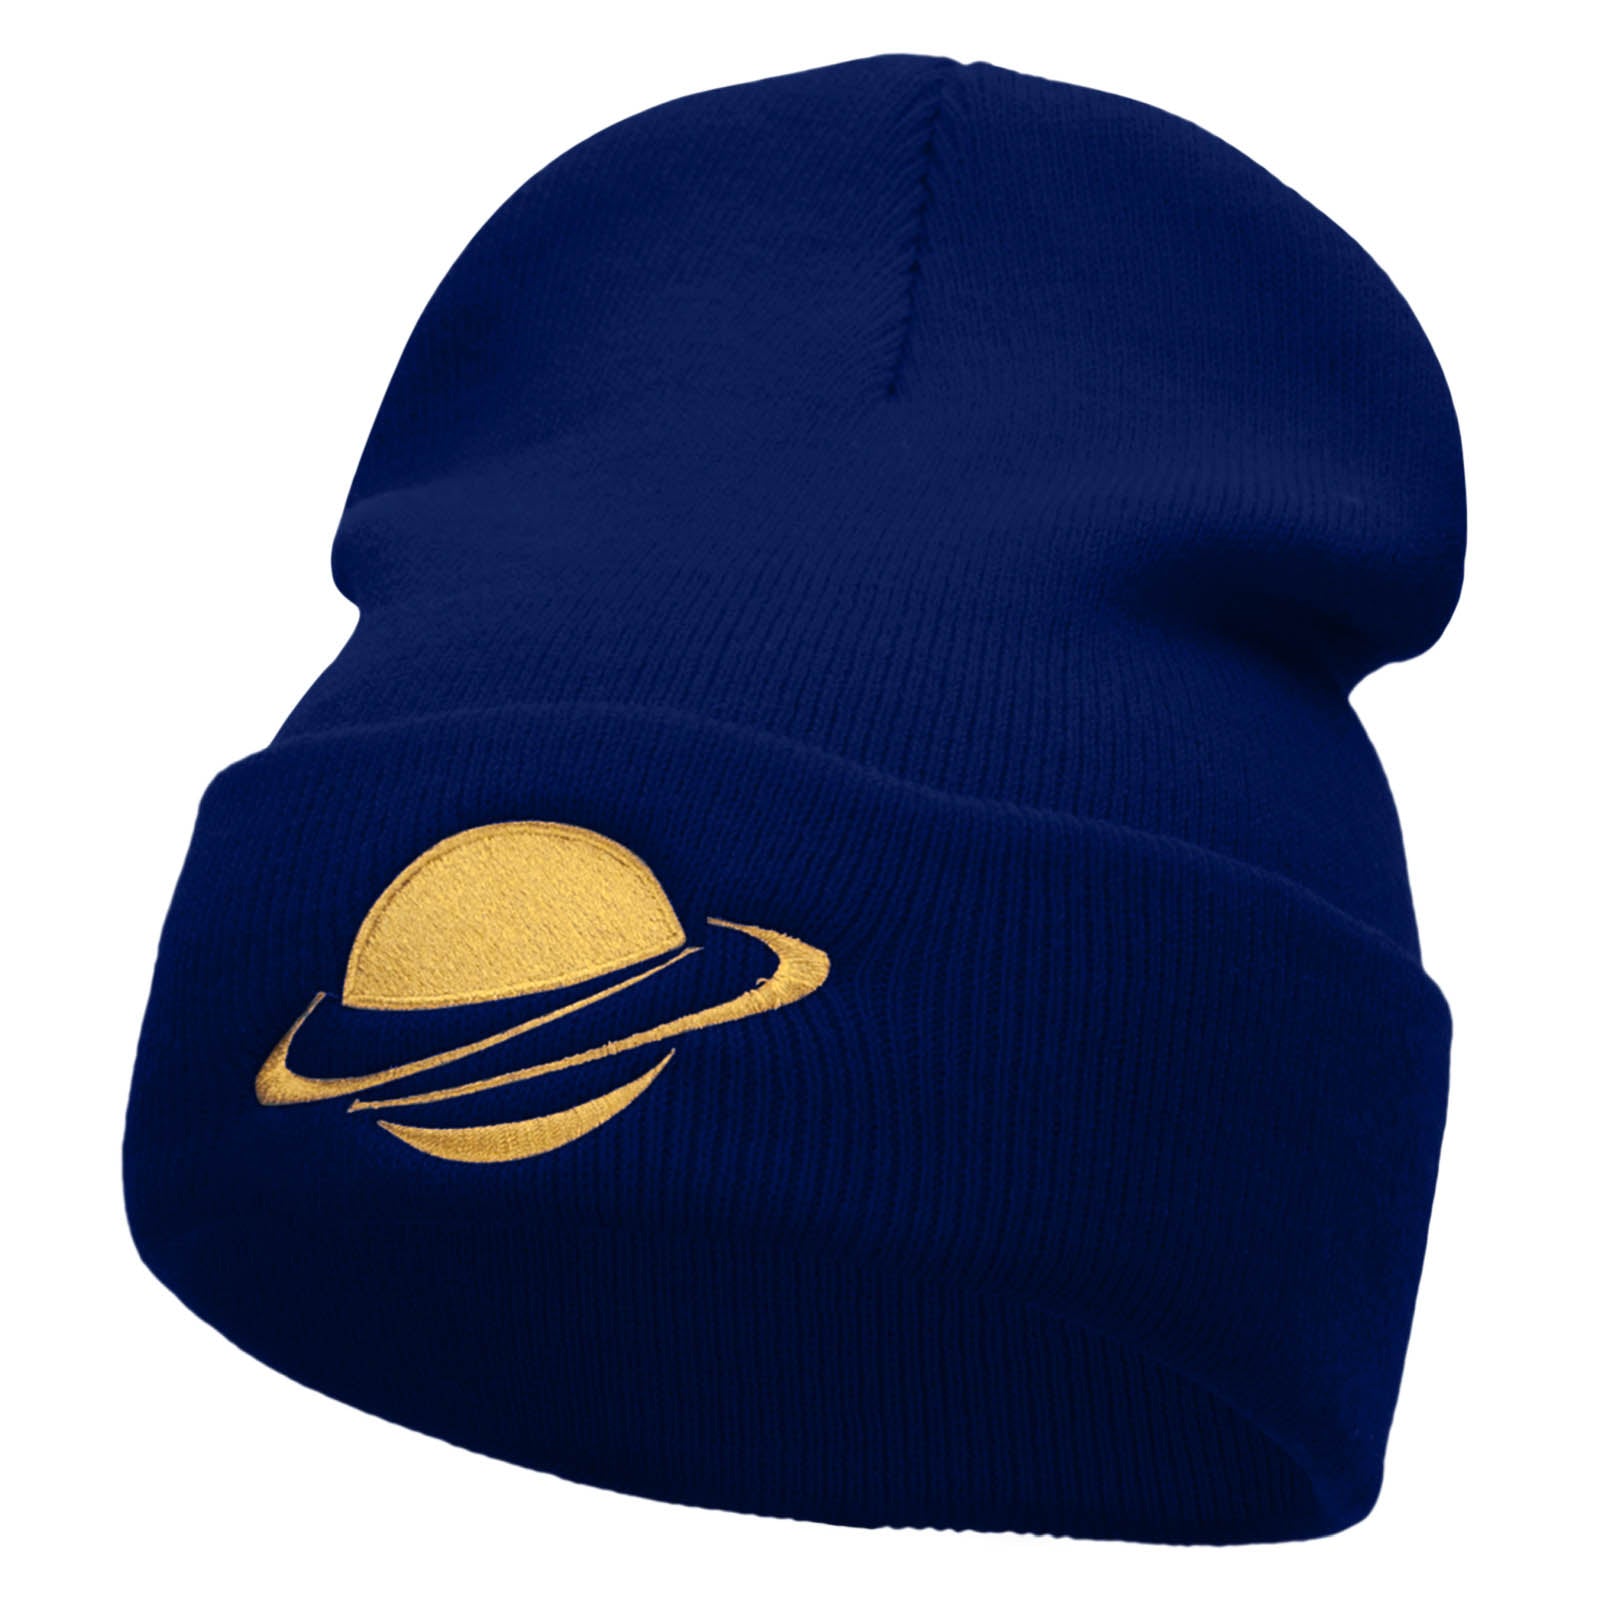 Planet Saturn Embroidered 12 Inch Long Knitted Beanie - Royal OSFM